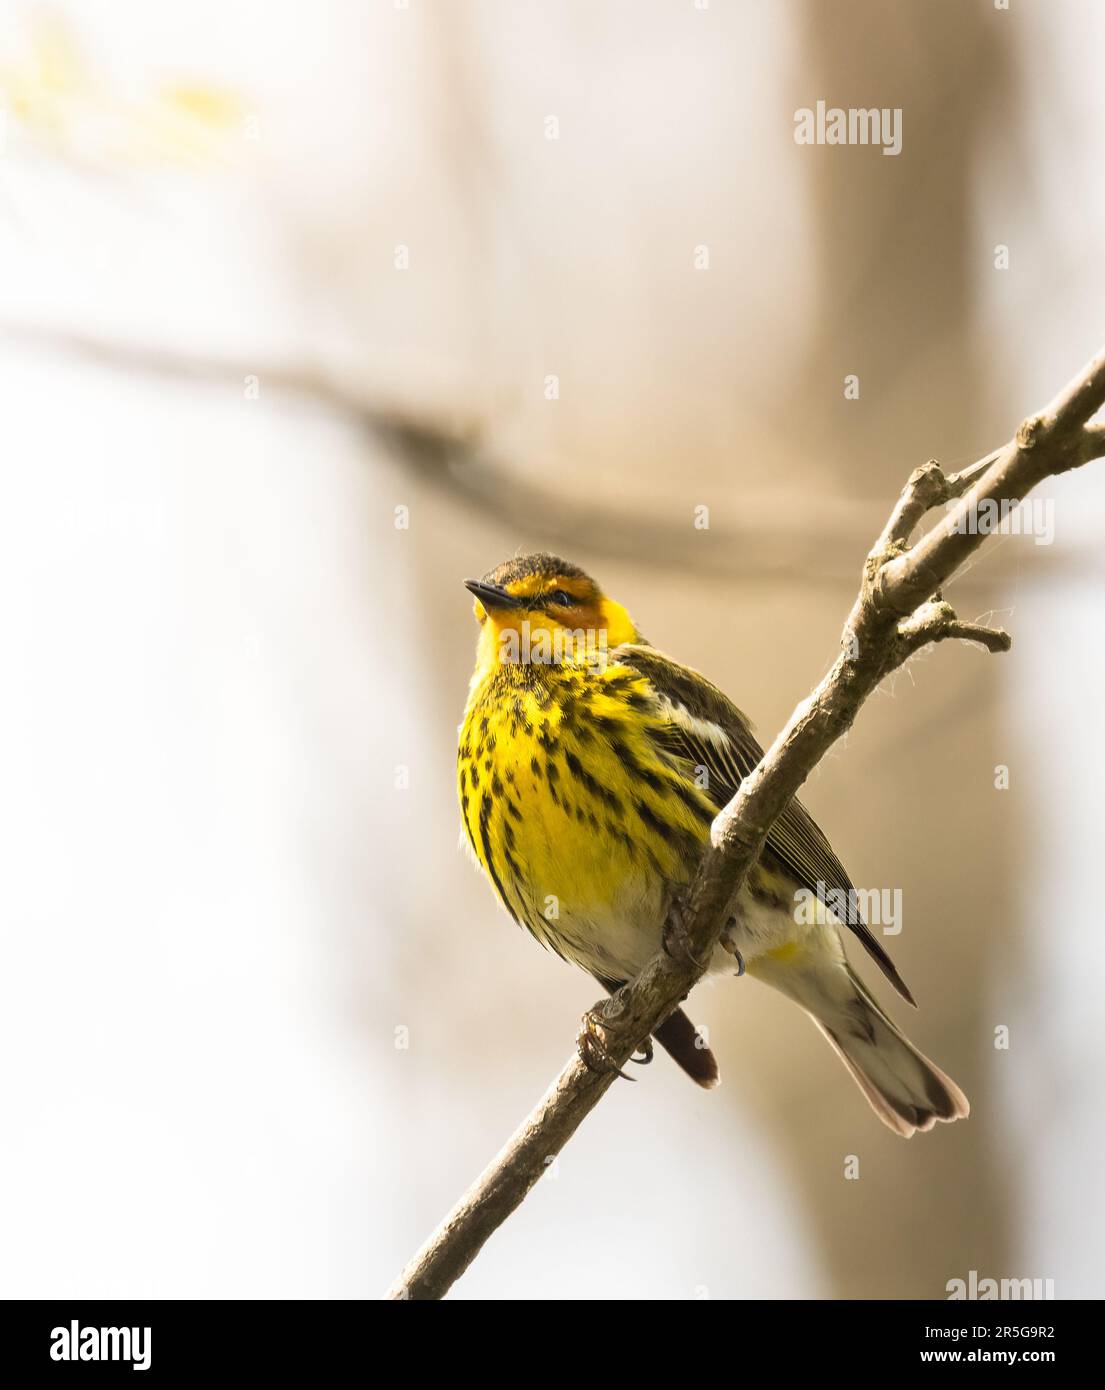 A male Cape May Warbler on a perch with soft focus background Stock Photo